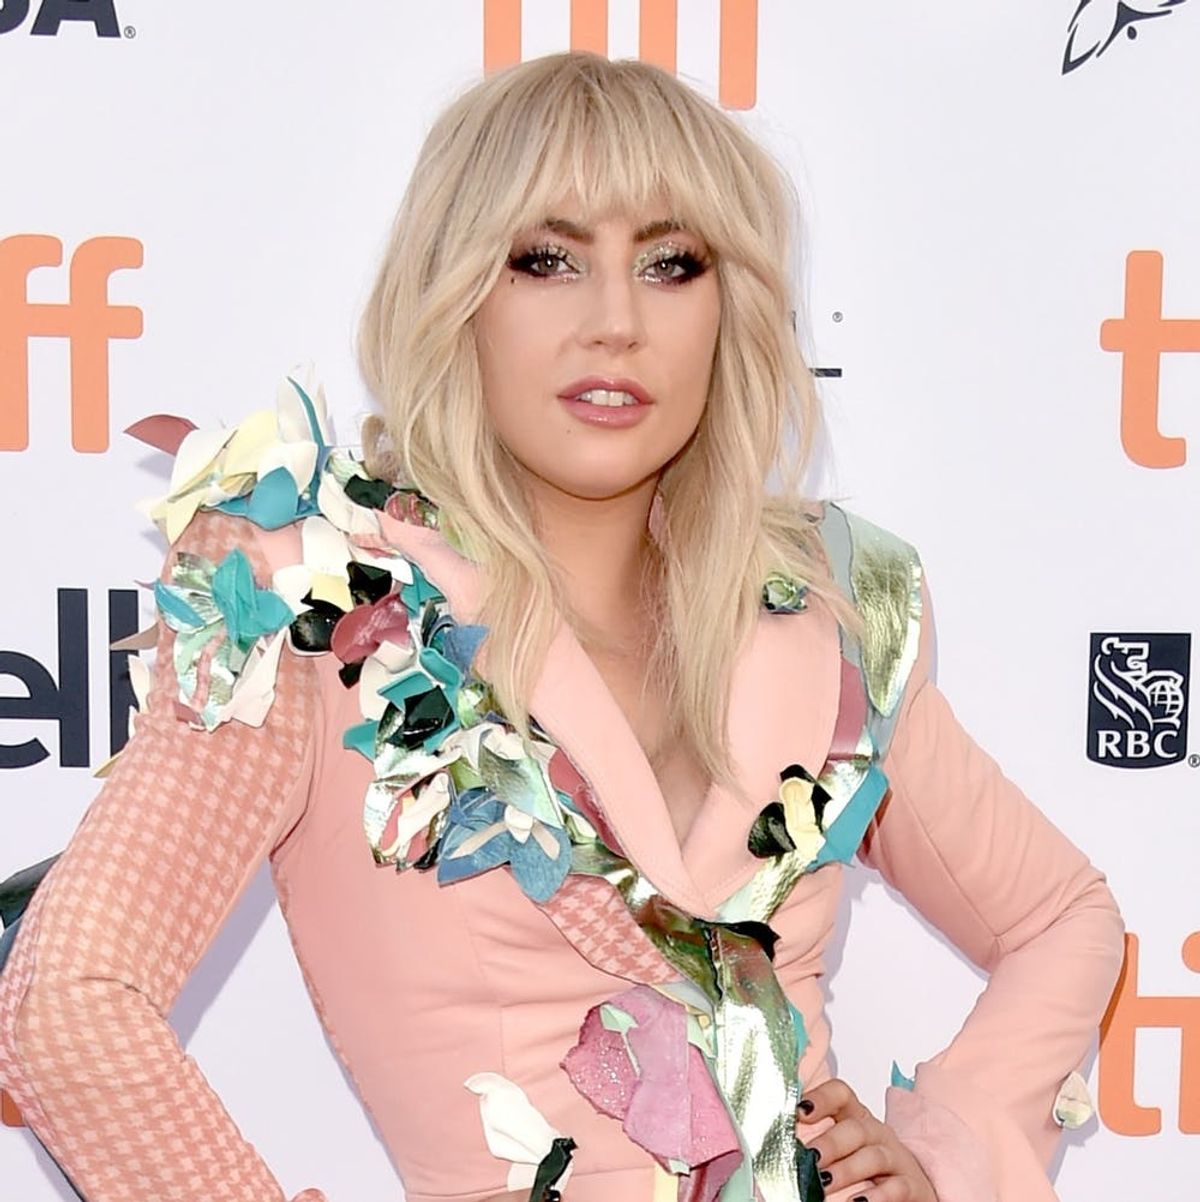 Lady Gaga’s Public Struggle With Fibromyalgia Draws Attention to the Very Real Impact of Invisible Illness on Women